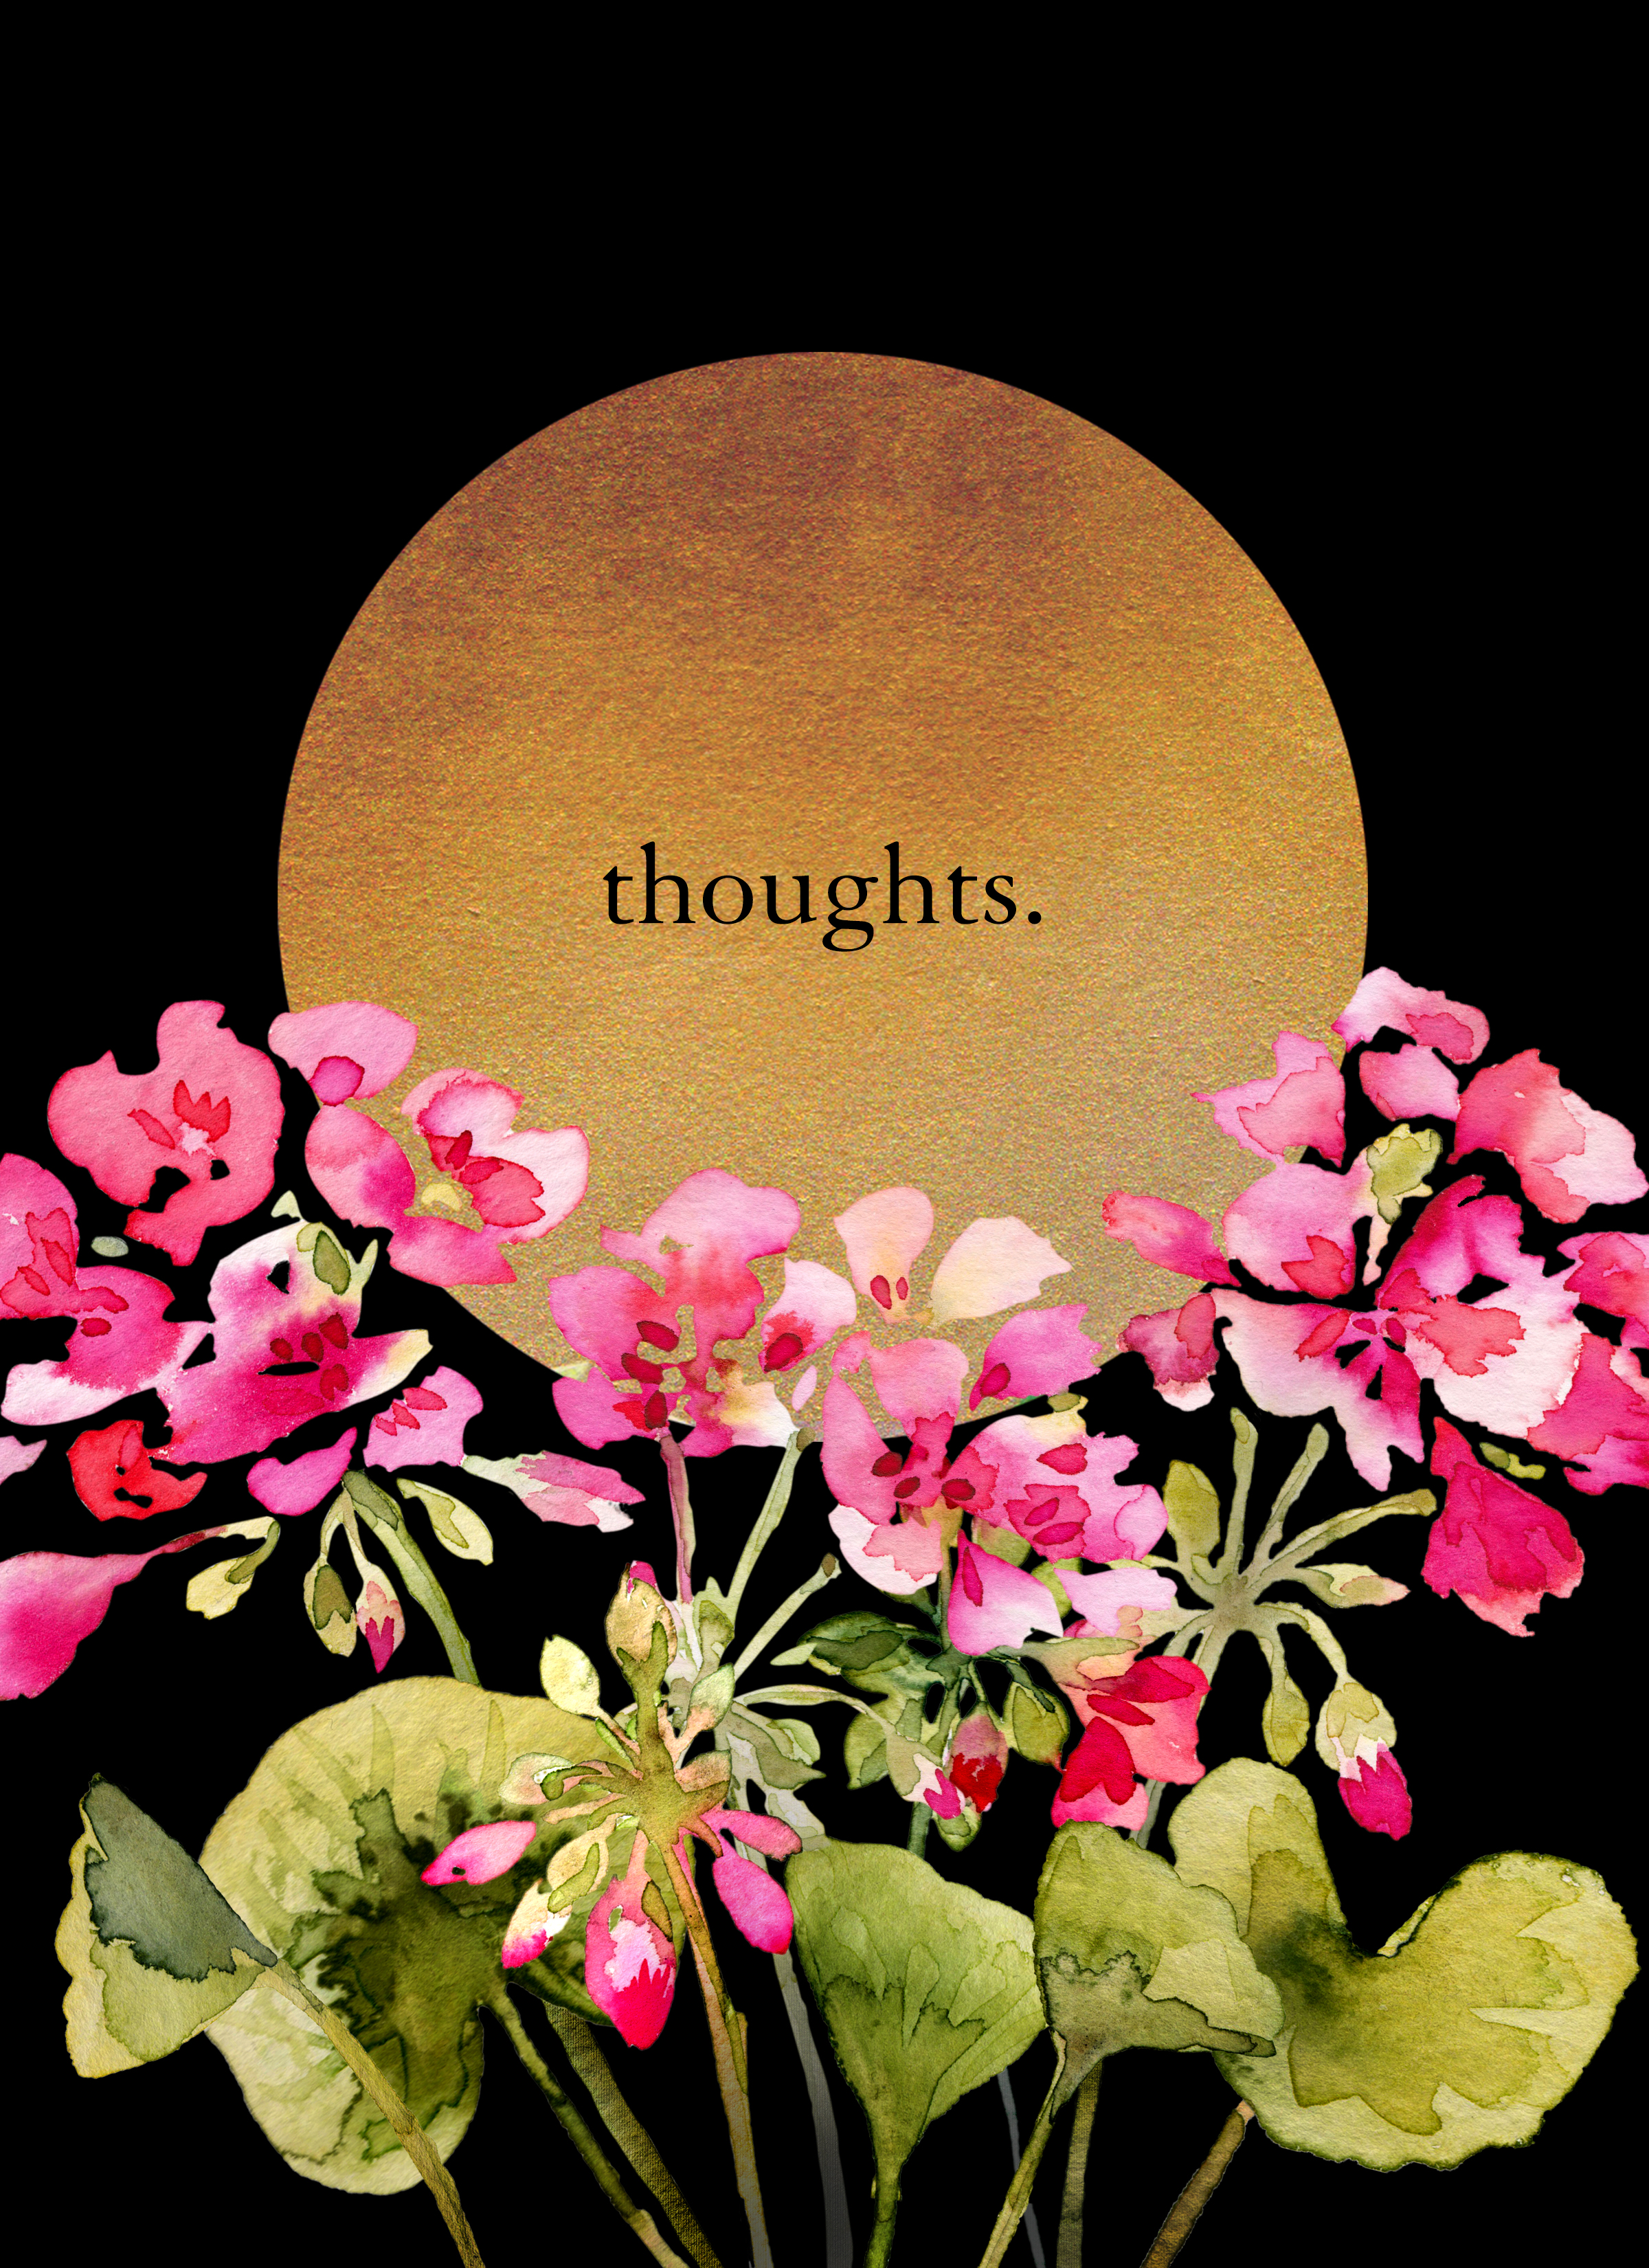 Journal cover "thoughts."